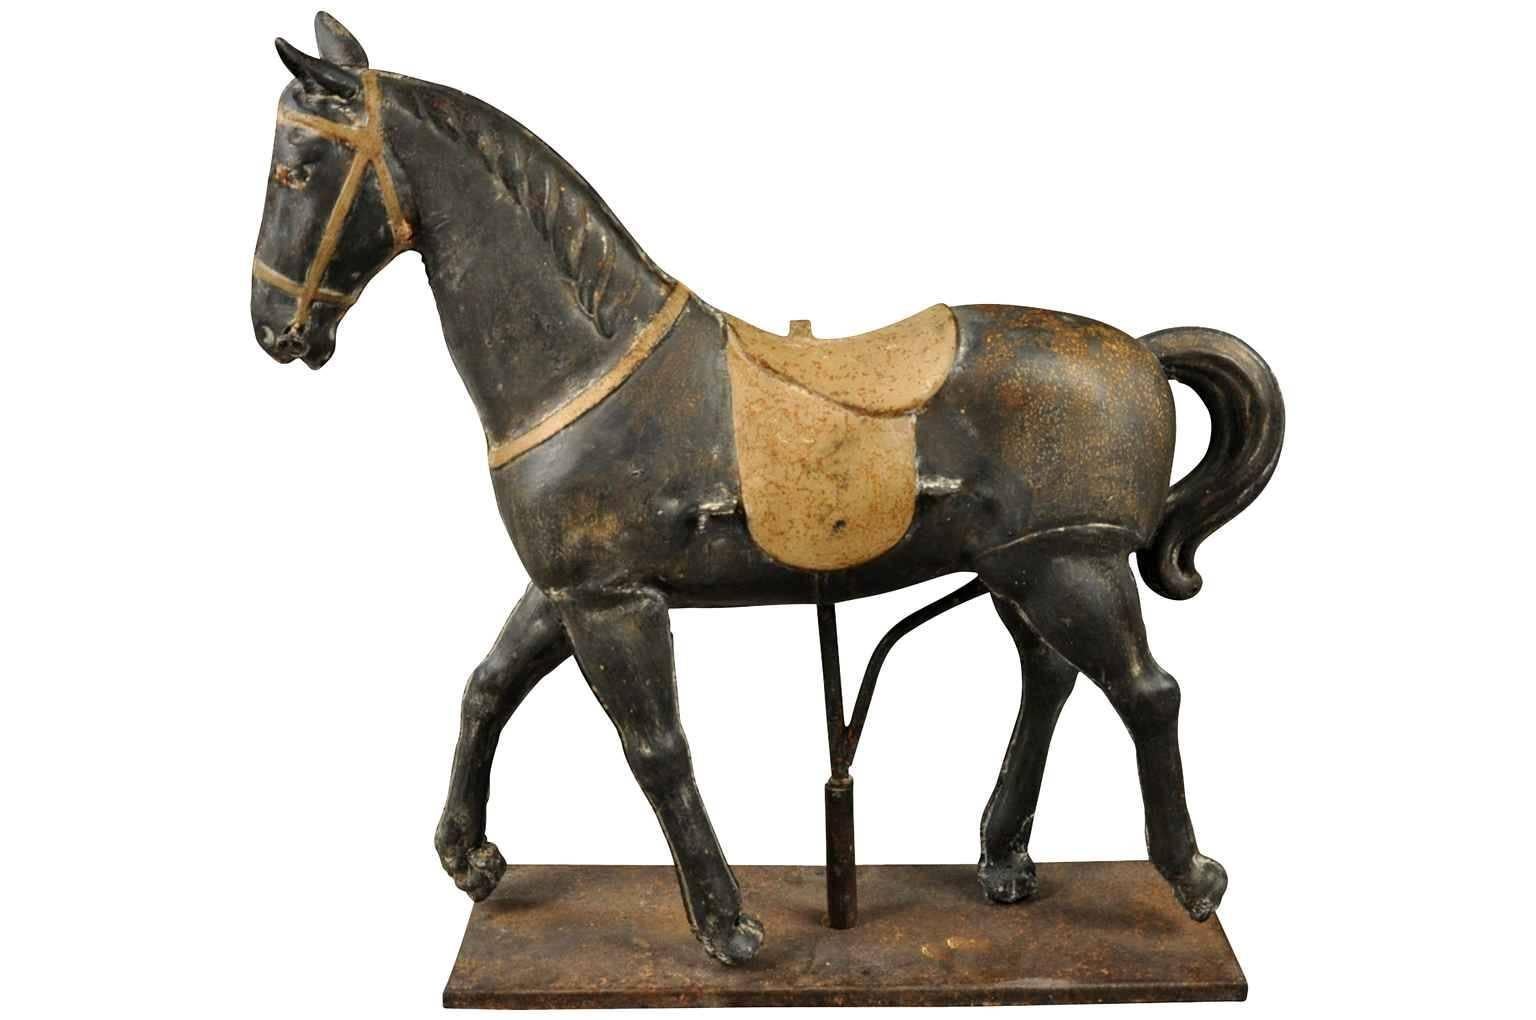 A delightful later 19th century toy horse constructed from painted metal. A charming accent piece for any living area.